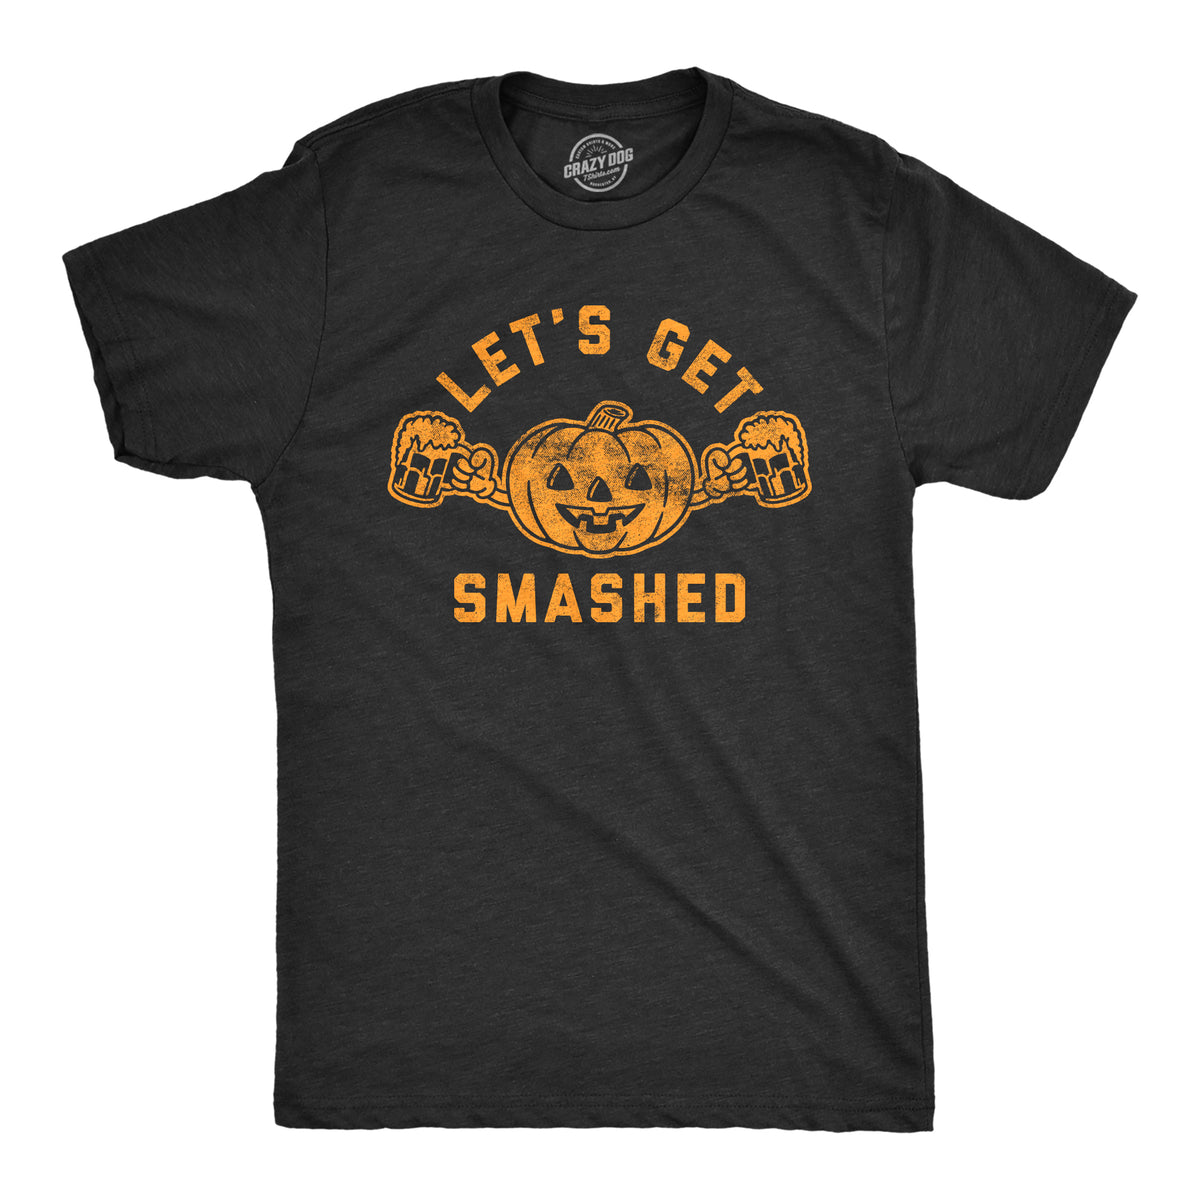 Funny Heather Black - Smashed Lets Get Smashed Mens T Shirt Nerdy Halloween Drinking Tee